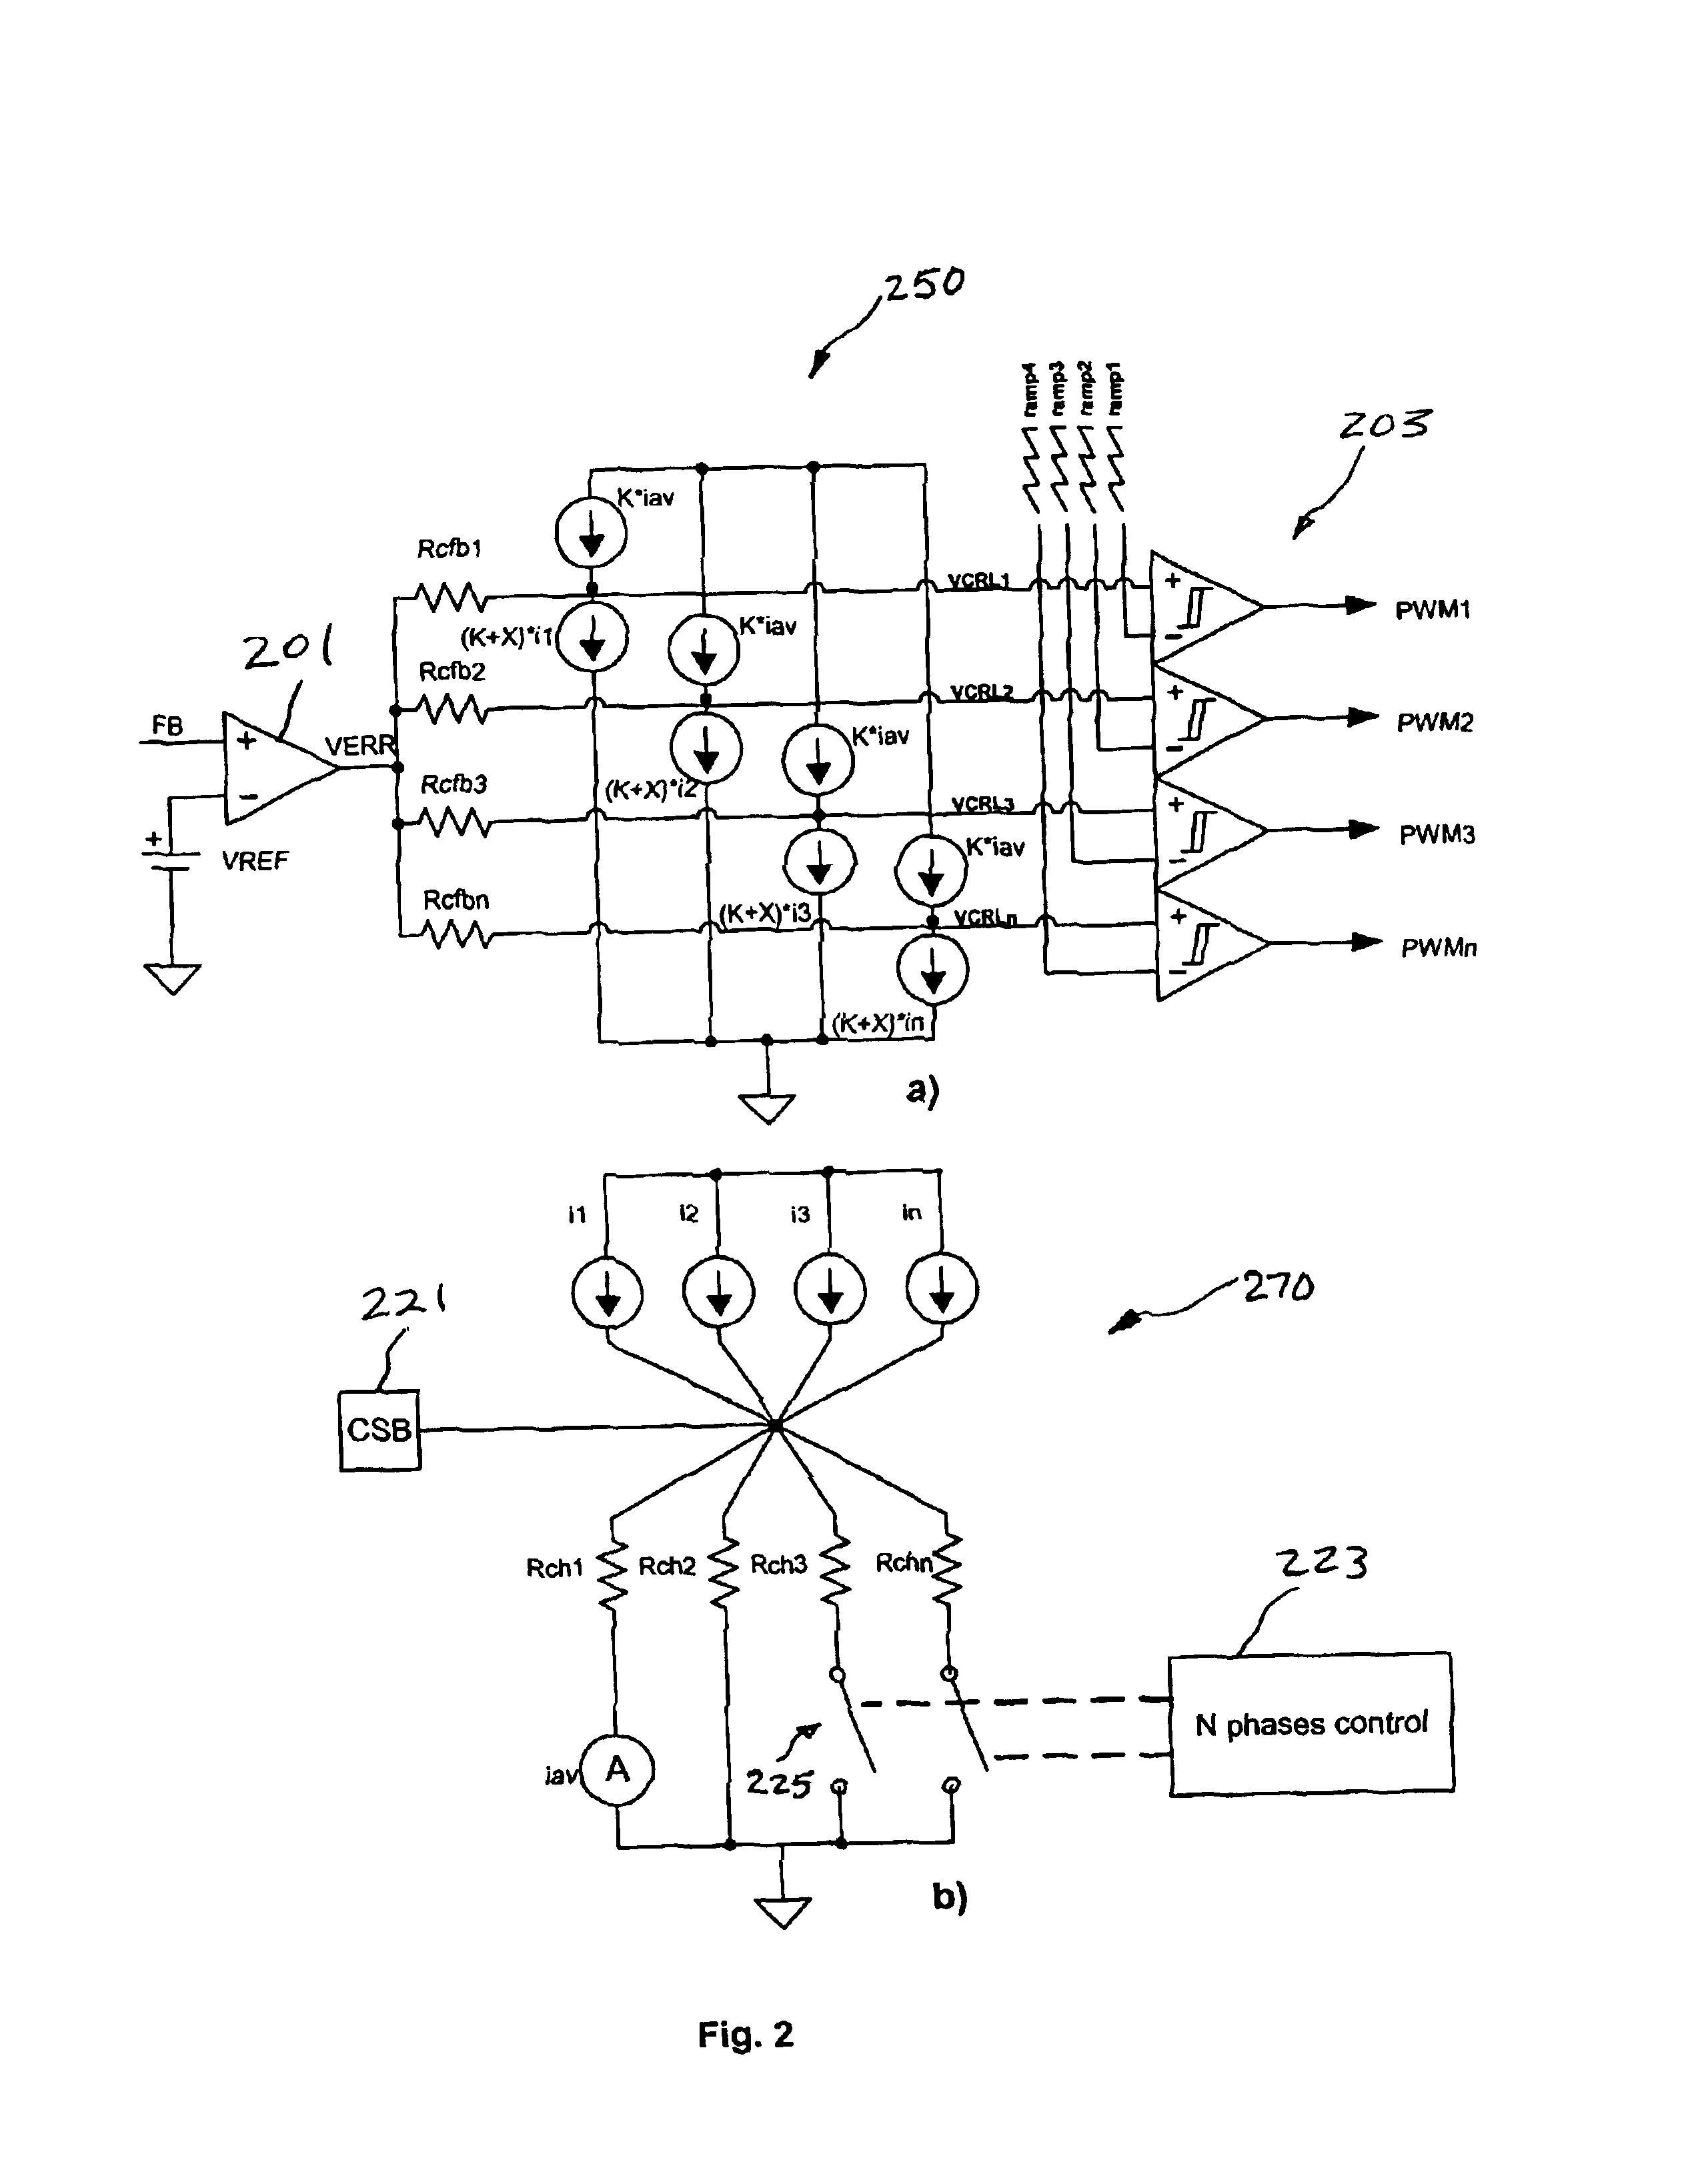 Multi-phase and multi-module power system with a current share bus